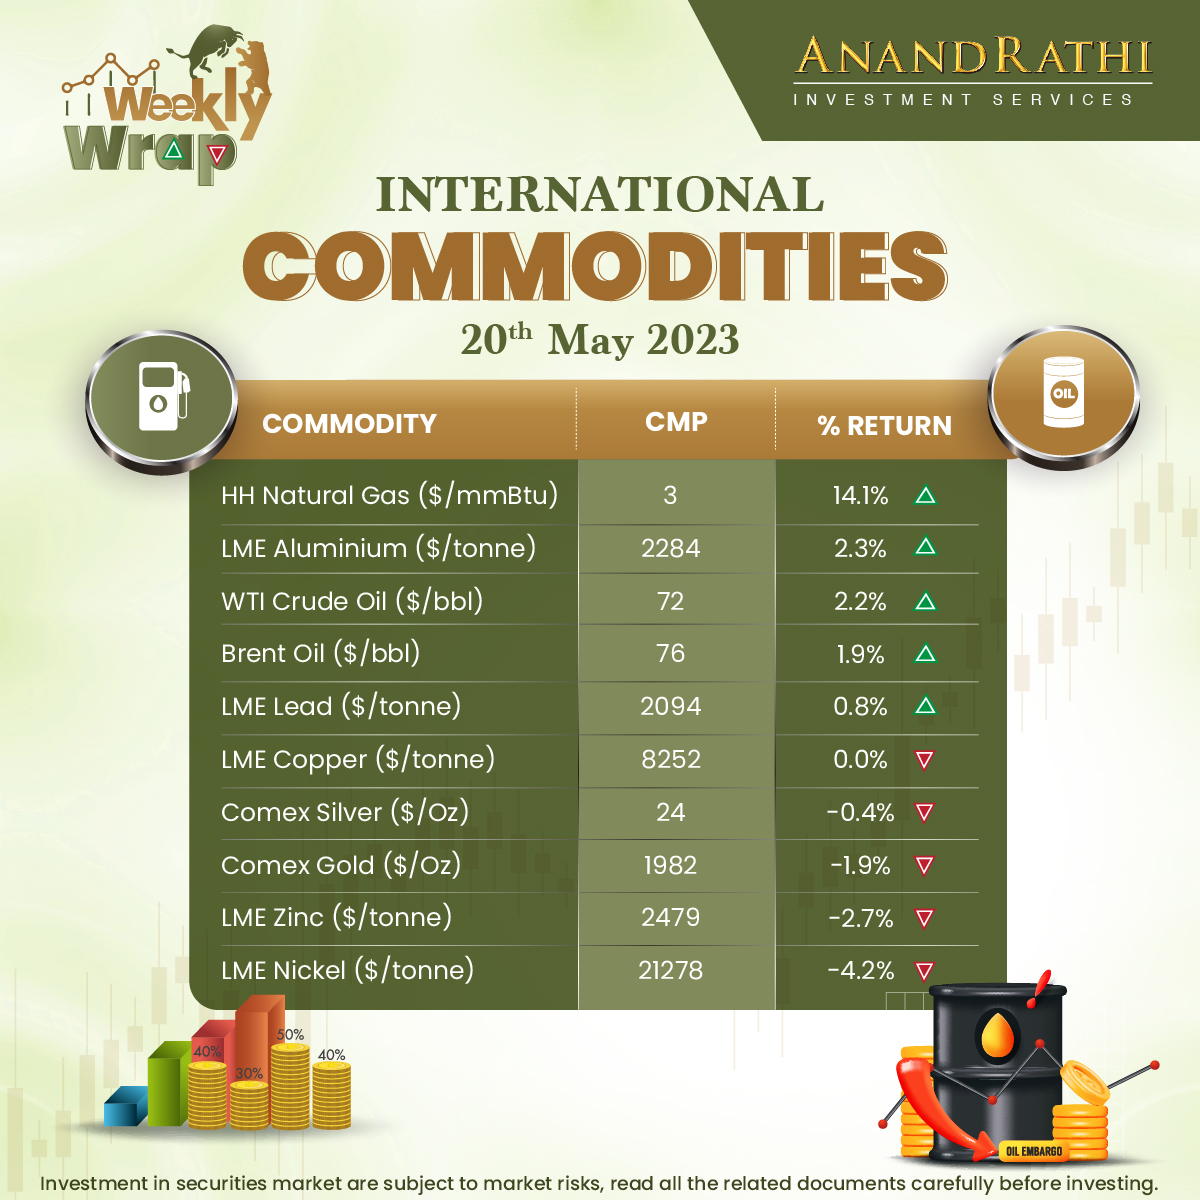 Take a glance at our Weekly Wrap - International Commodities 

Disclaimer -  bit.ly/AnandRathiRese…

#WeeklyWrap #anandrathi #stockbroker #stockmarket #commodities #currencies #international #nifty #sense